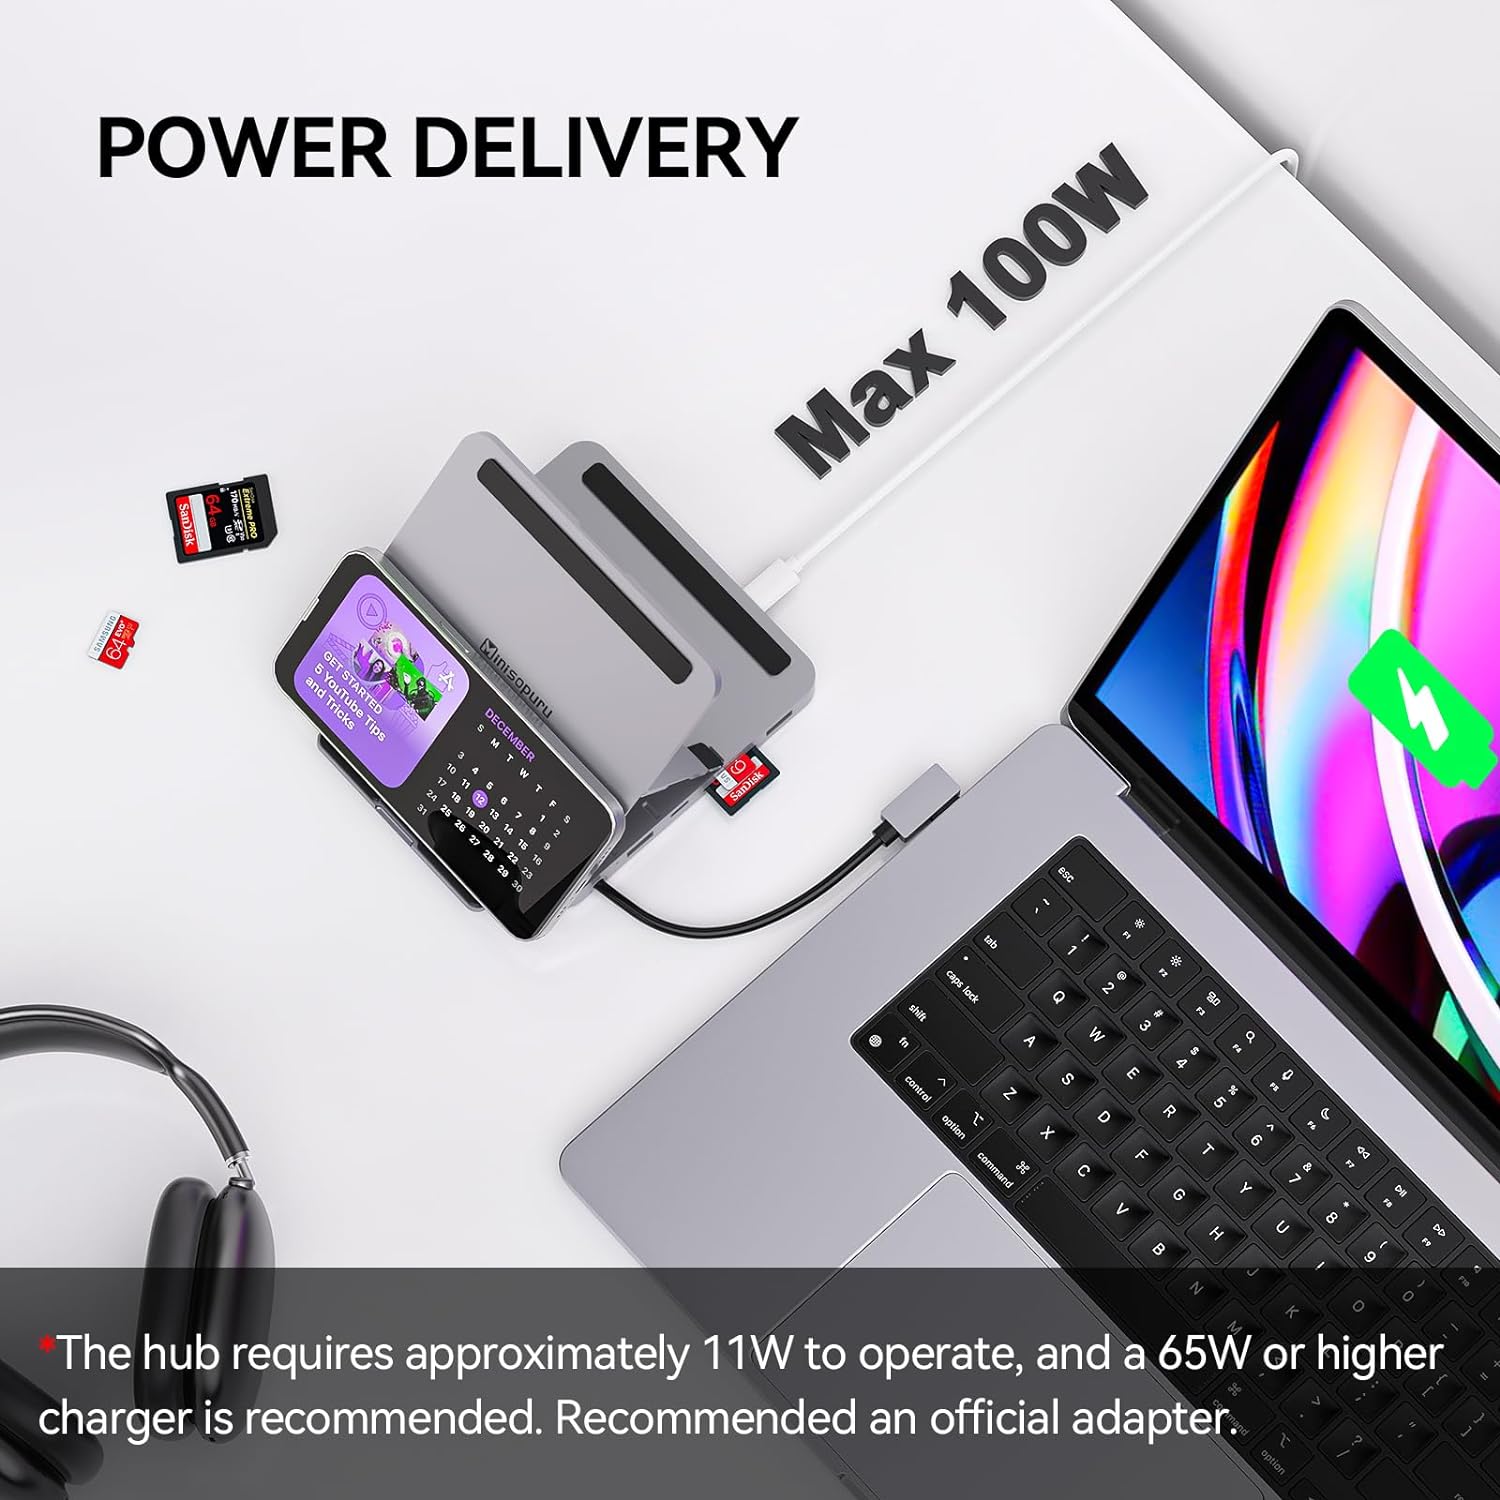 MAX 100W POWER DELIVERY